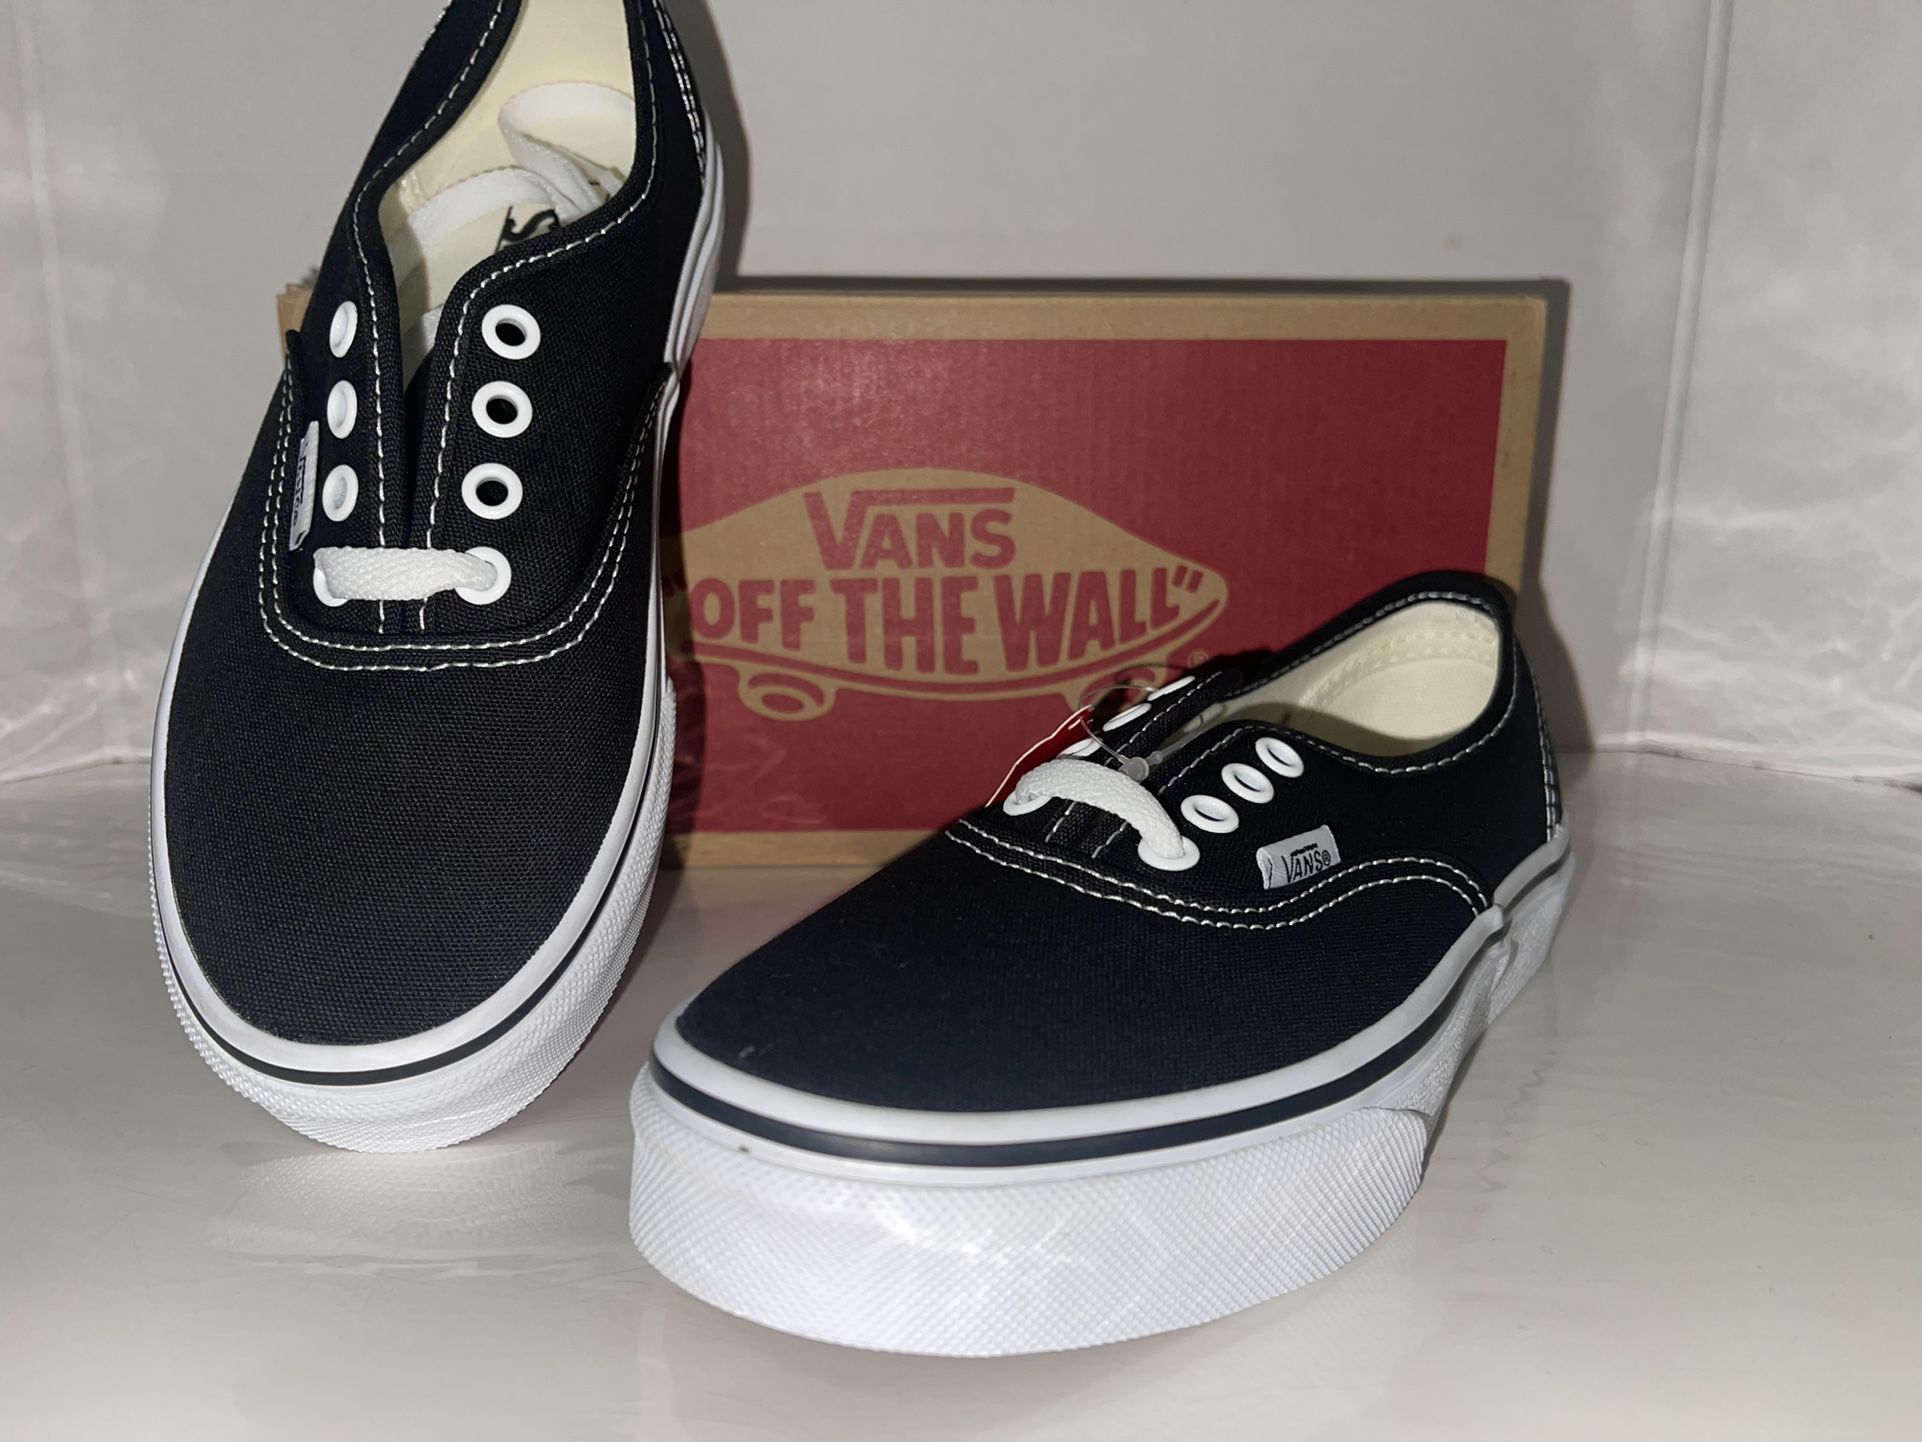 Vans Authentic Skate Shoes Black/White VN000WWX6BT Kids Size 2 | New In Box 🏁🏁